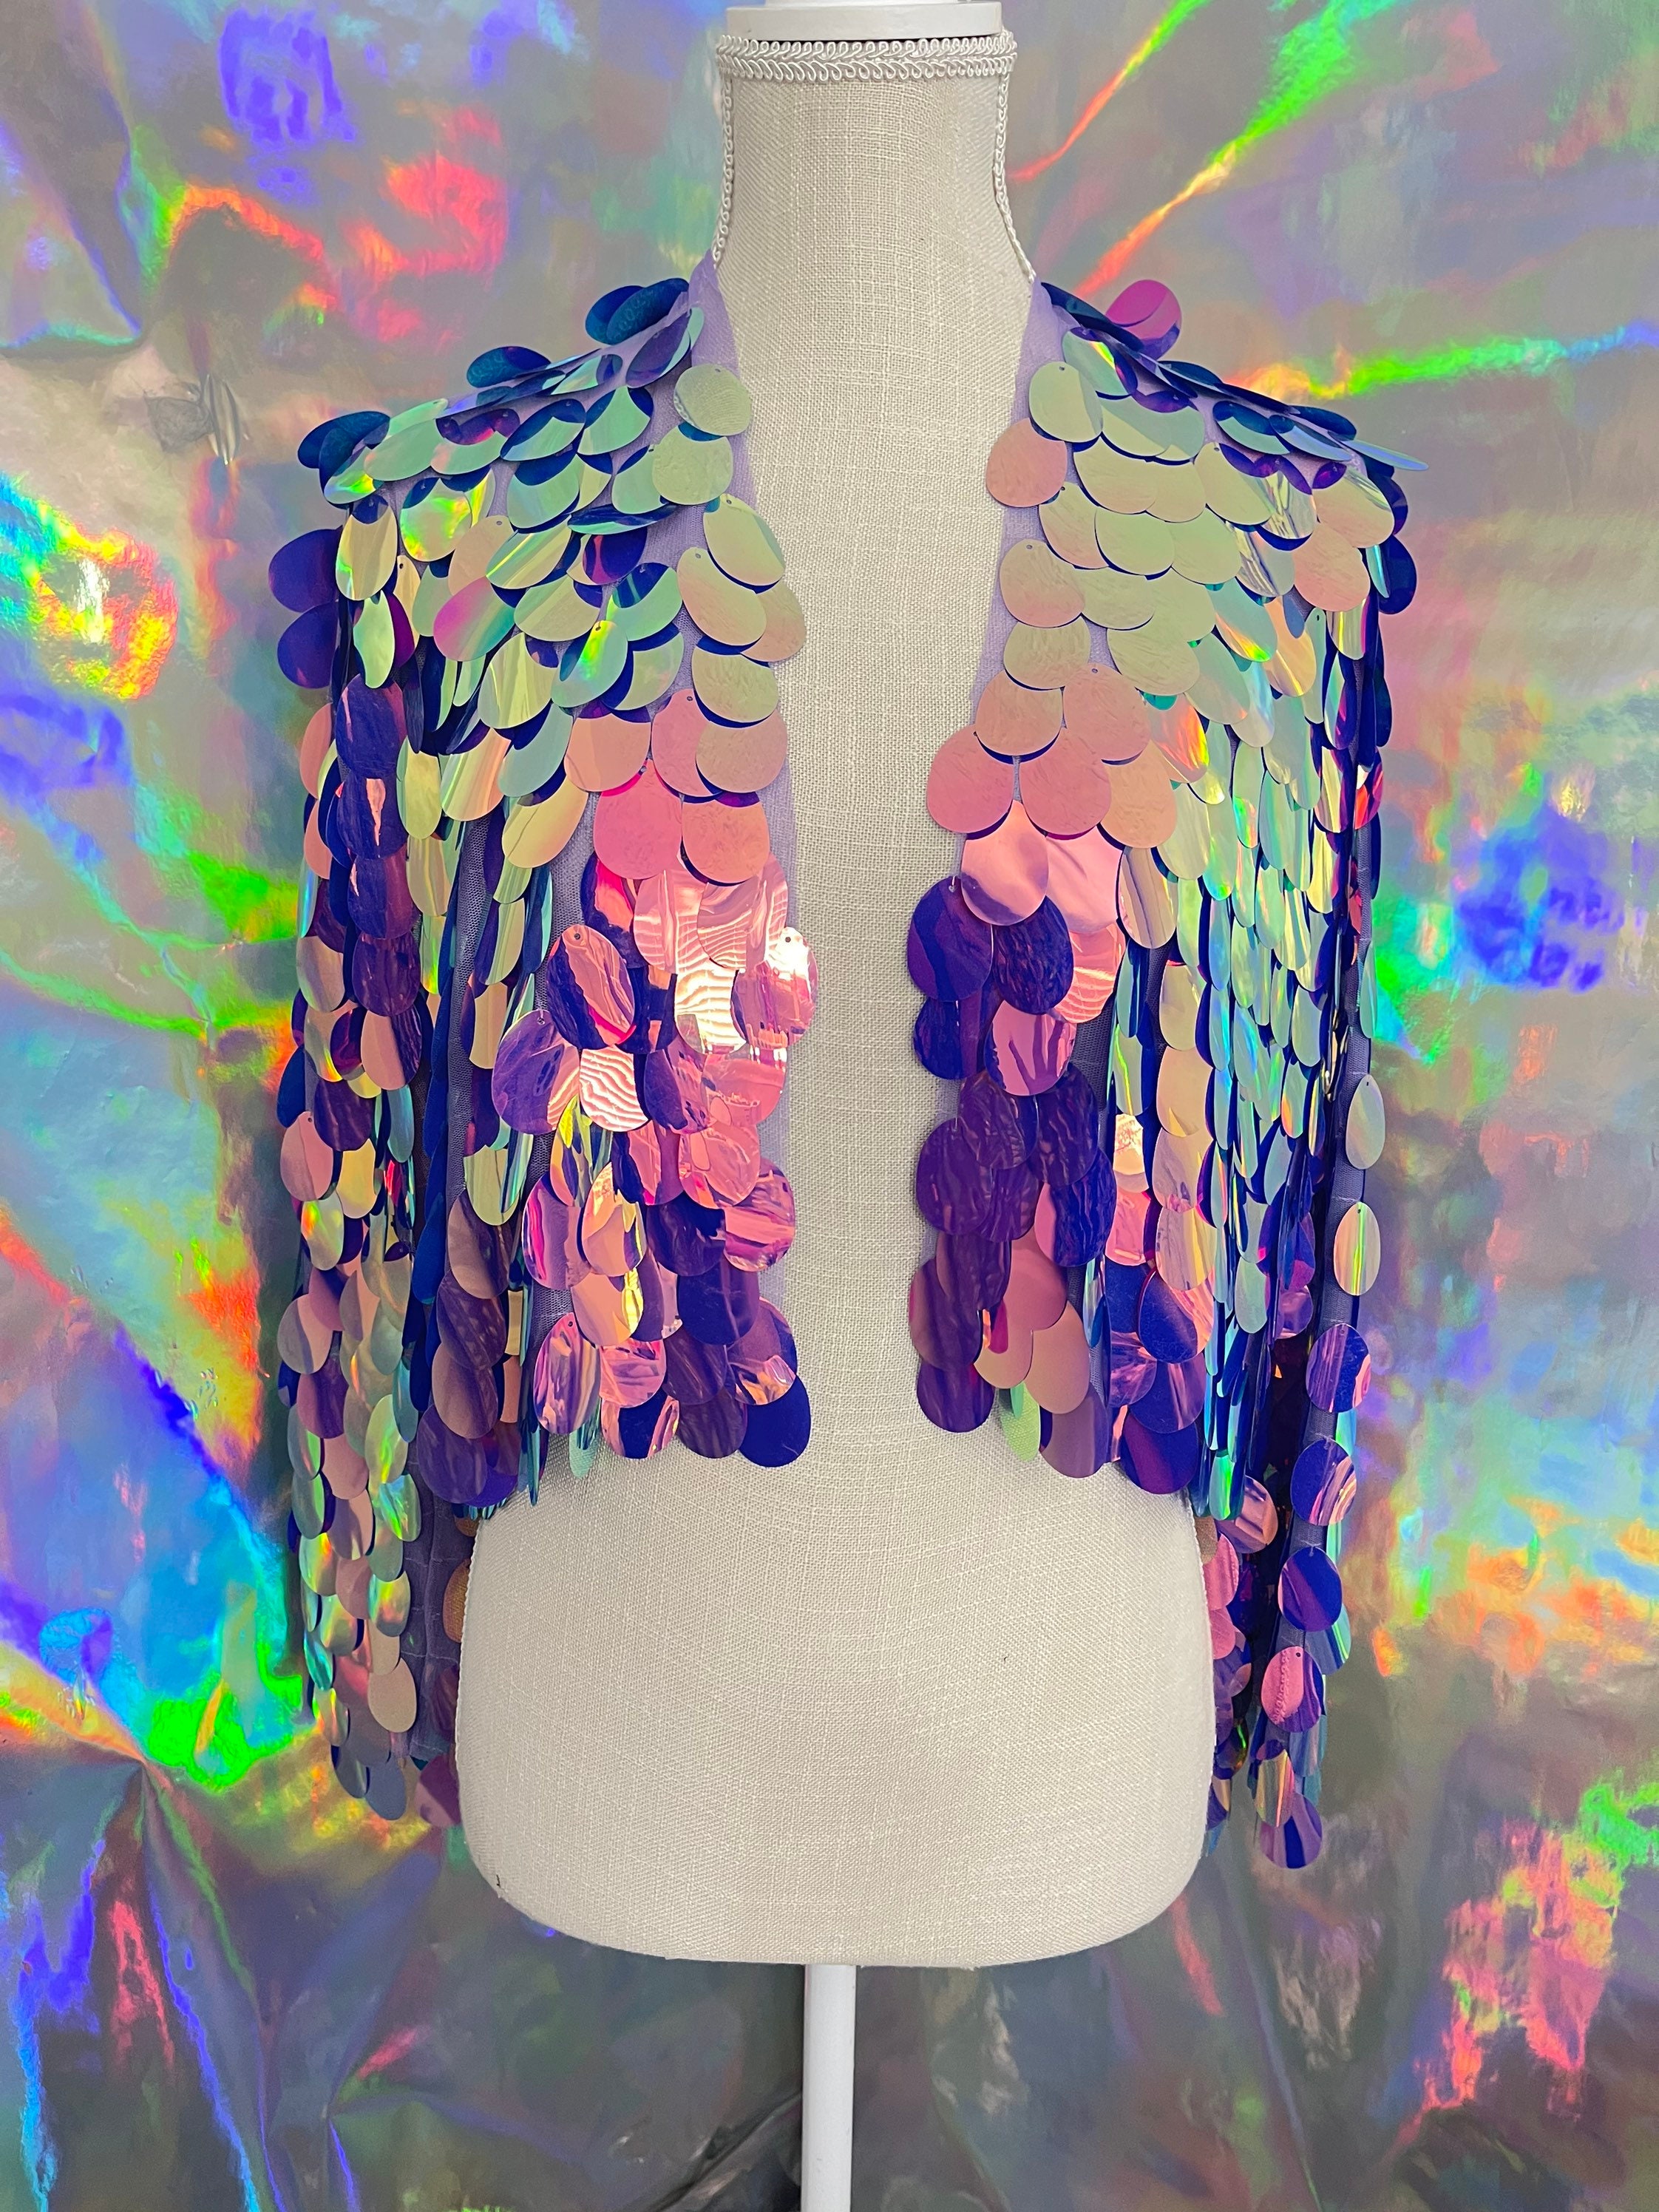 Purple and Gold Sequin Jacket